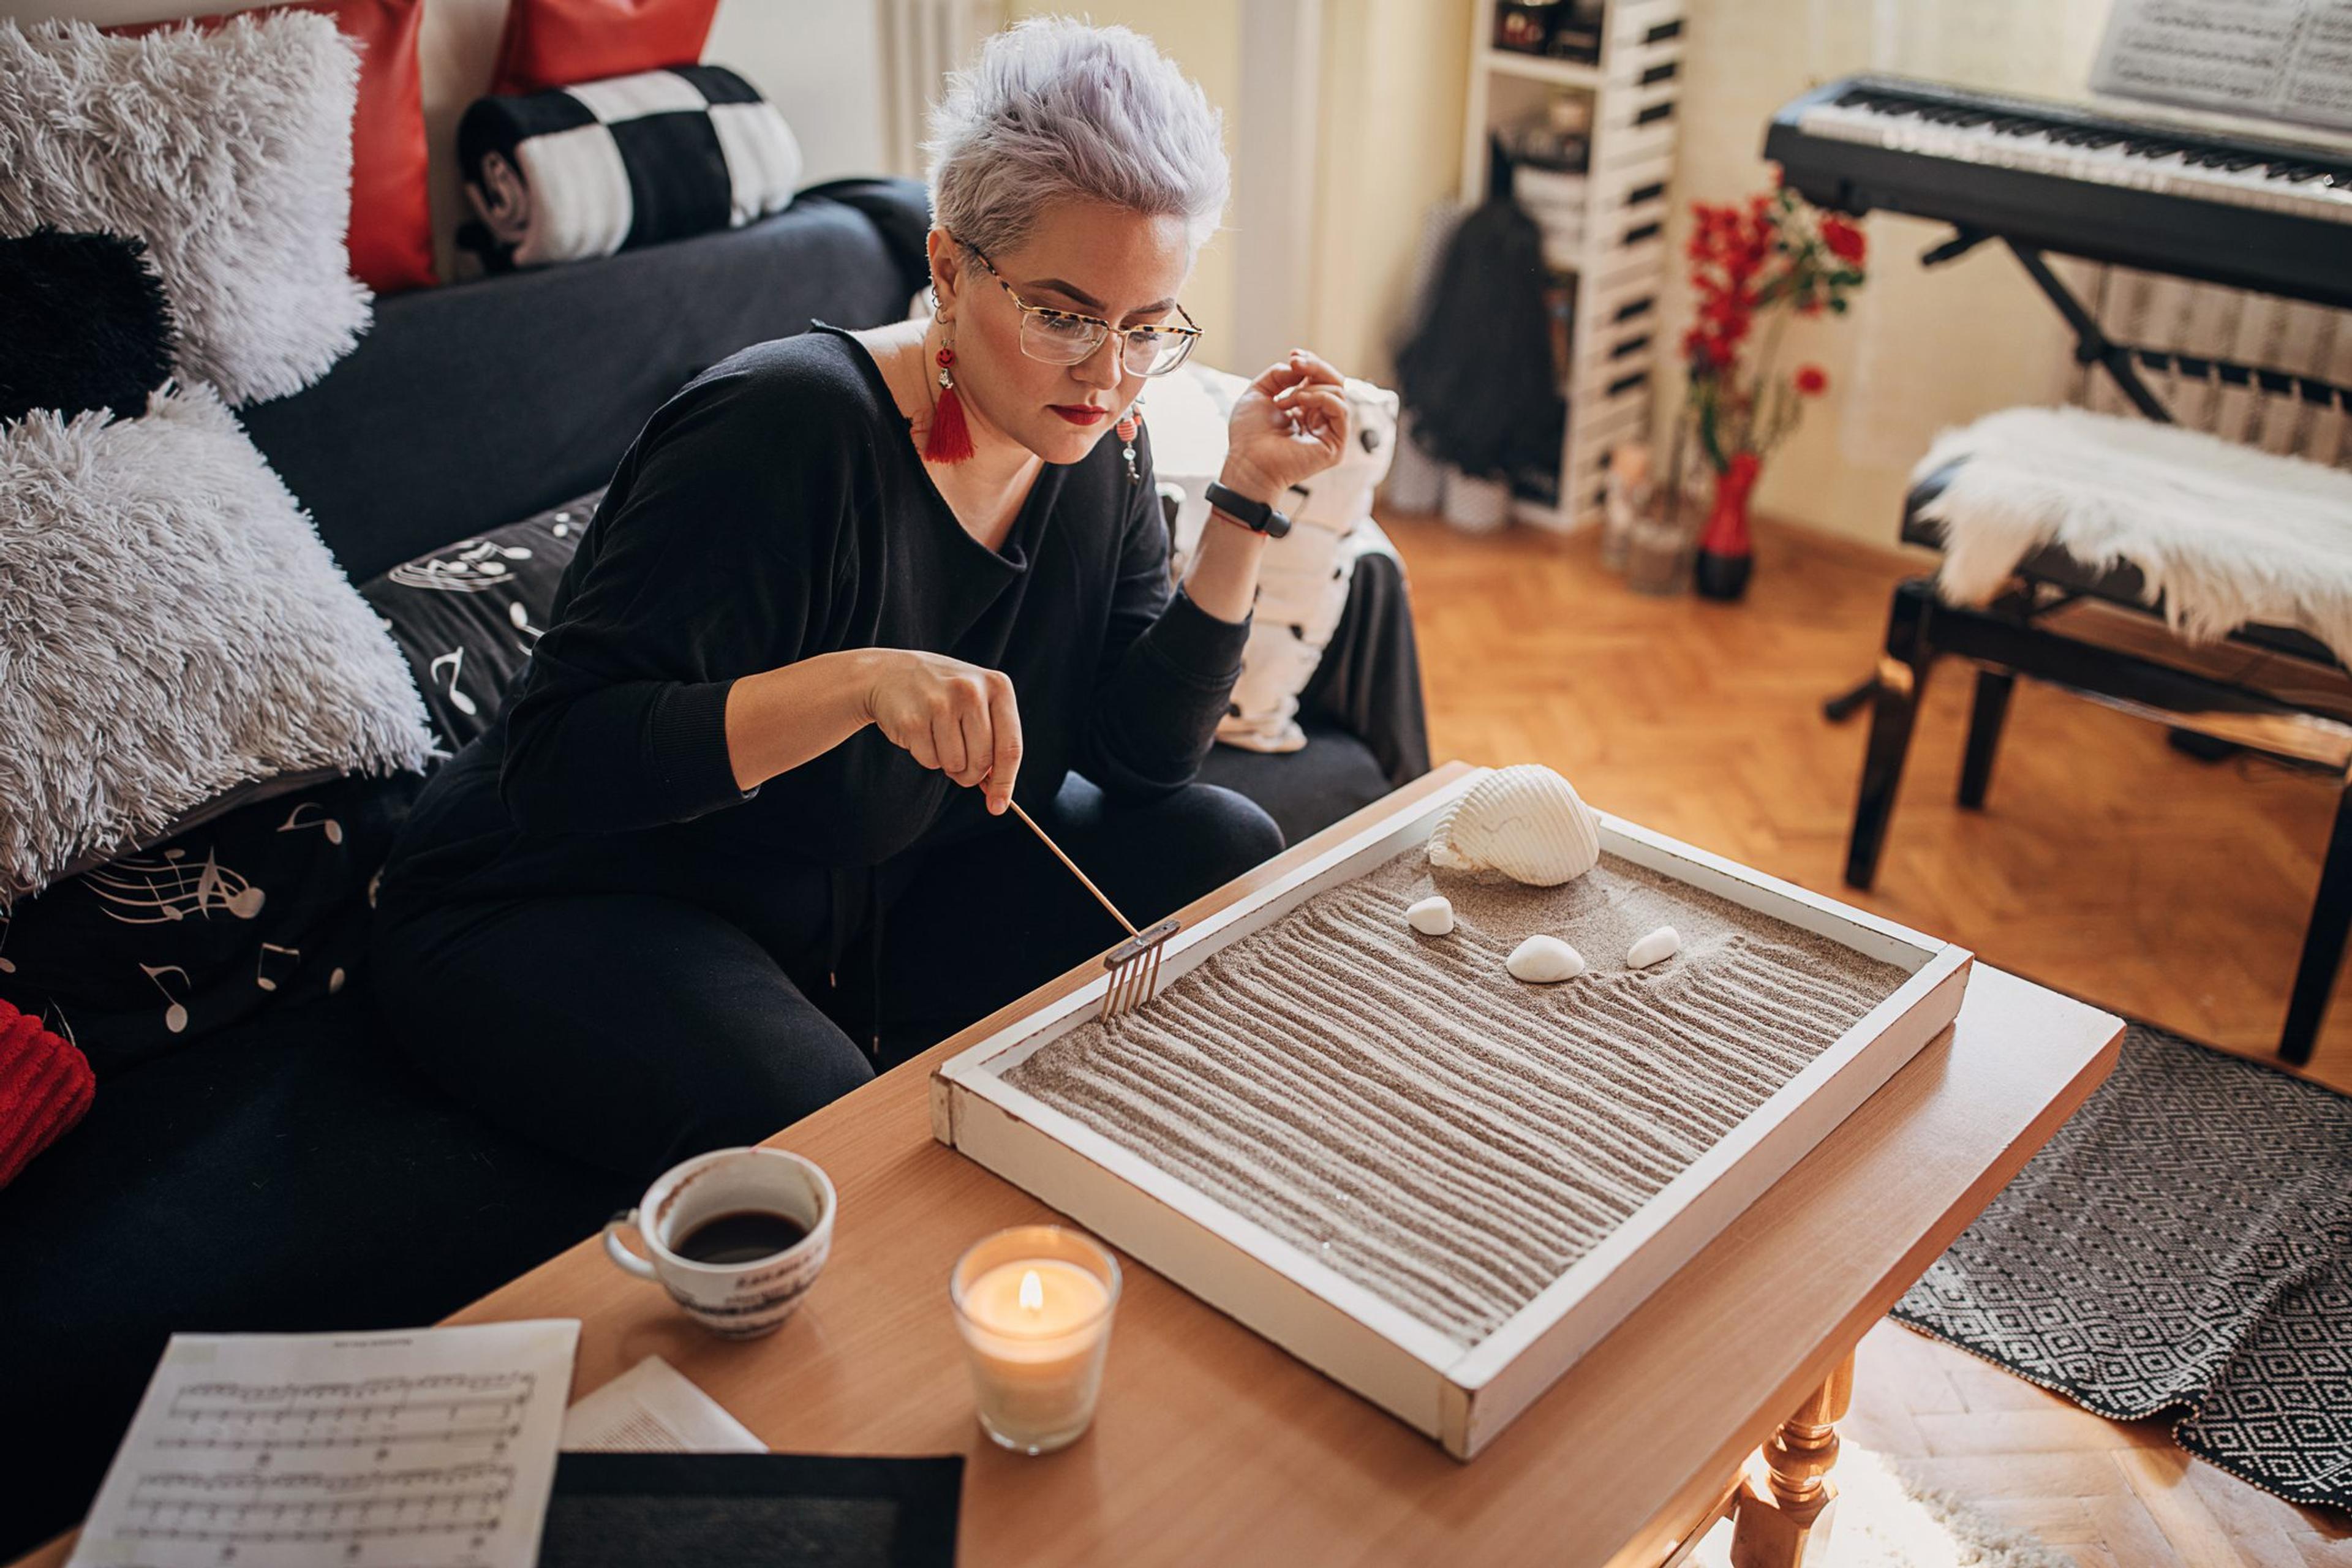 Woman sitting on the ground using a zen garden on the coffee table